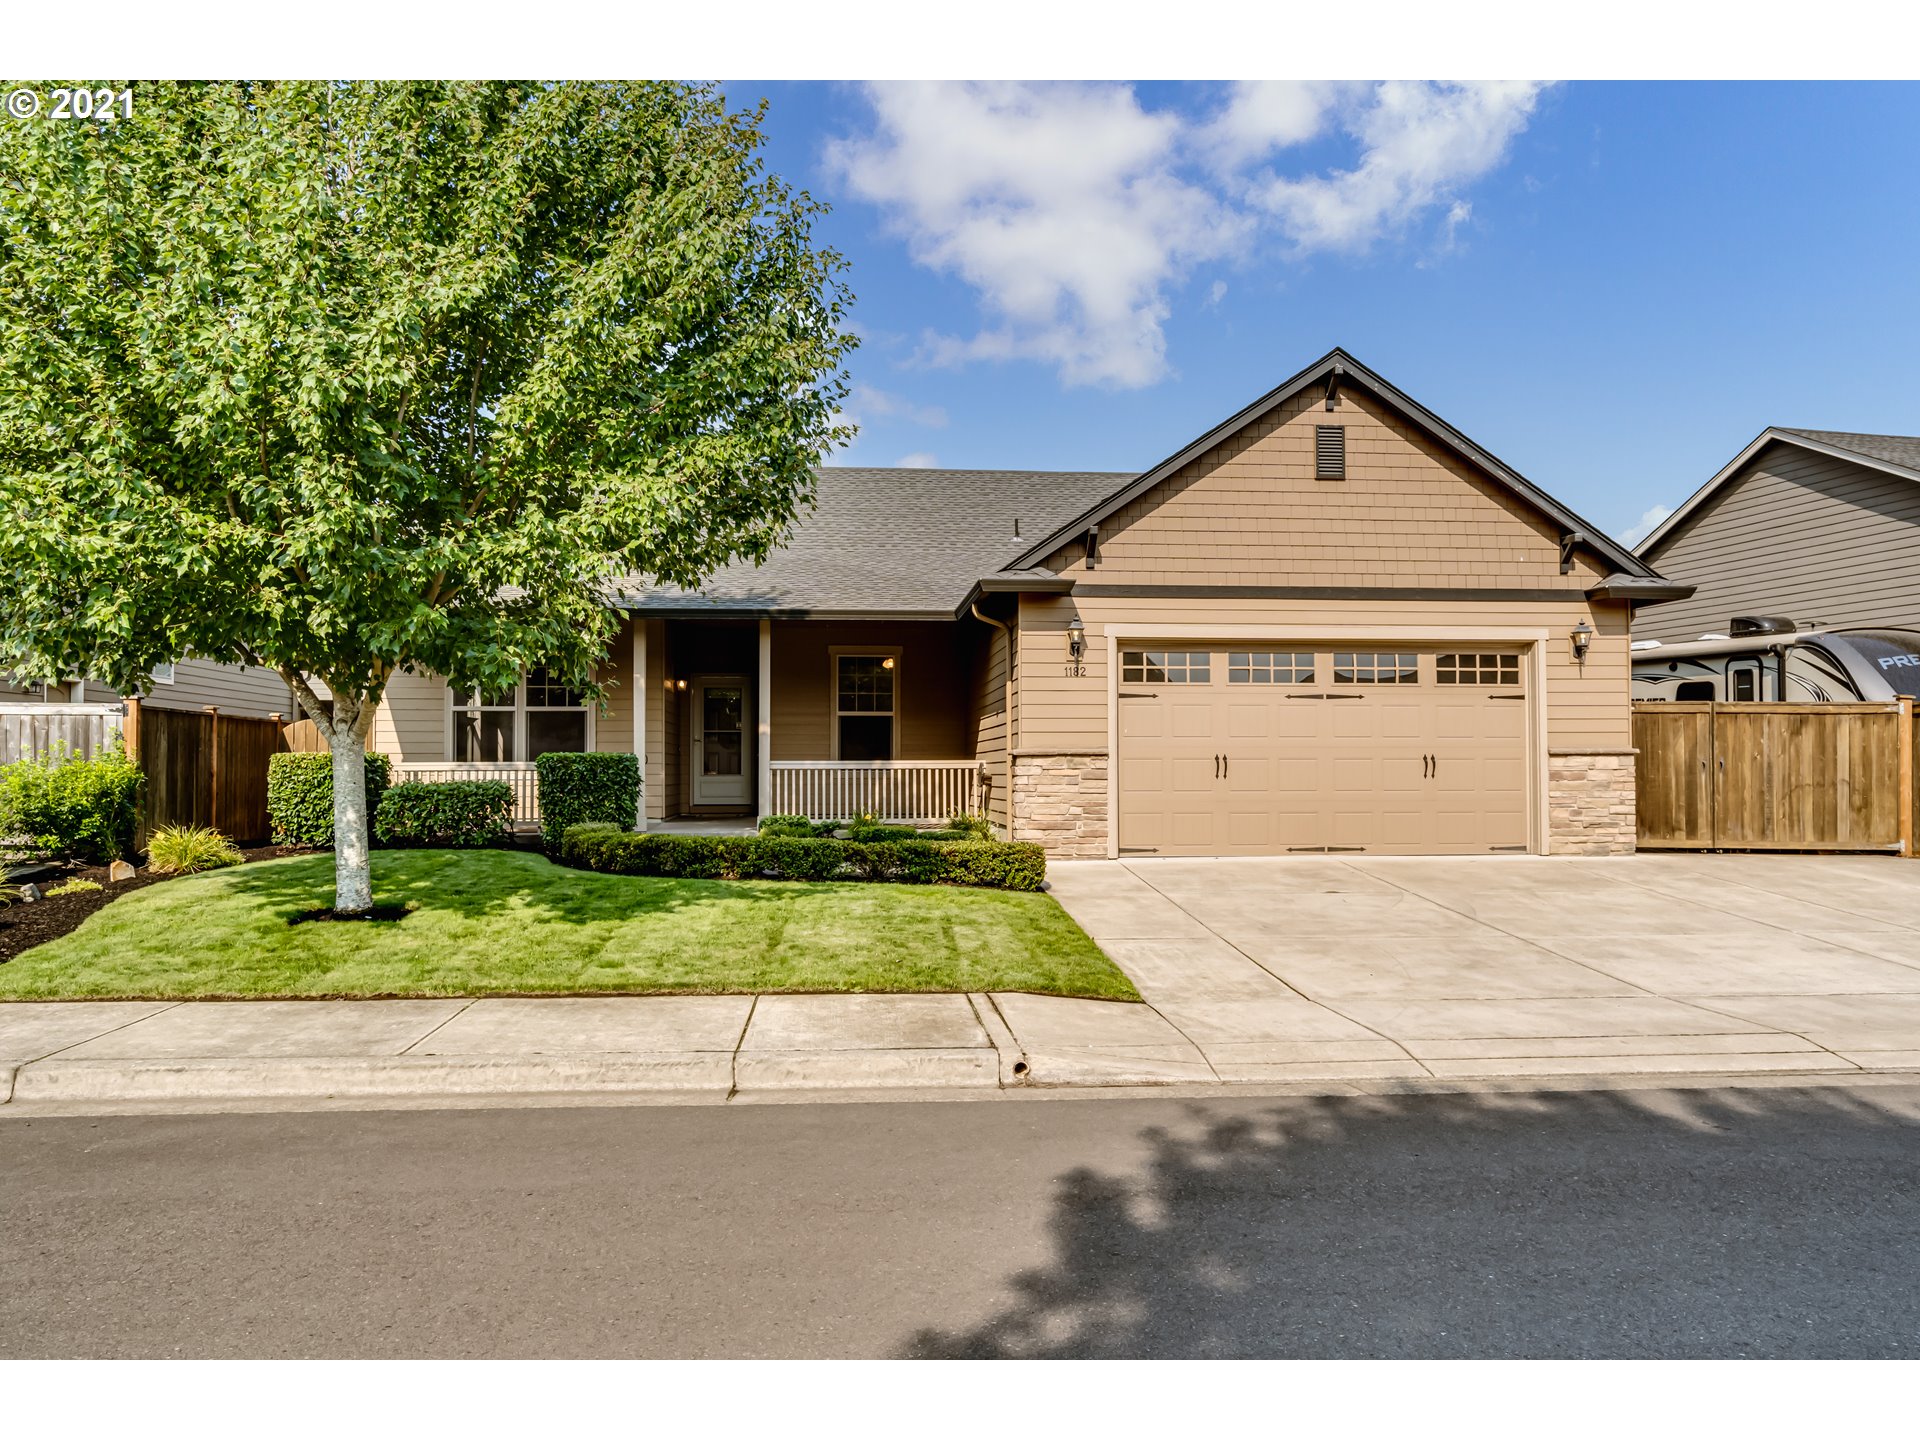 1182 S 41ST PL (1 of 20)